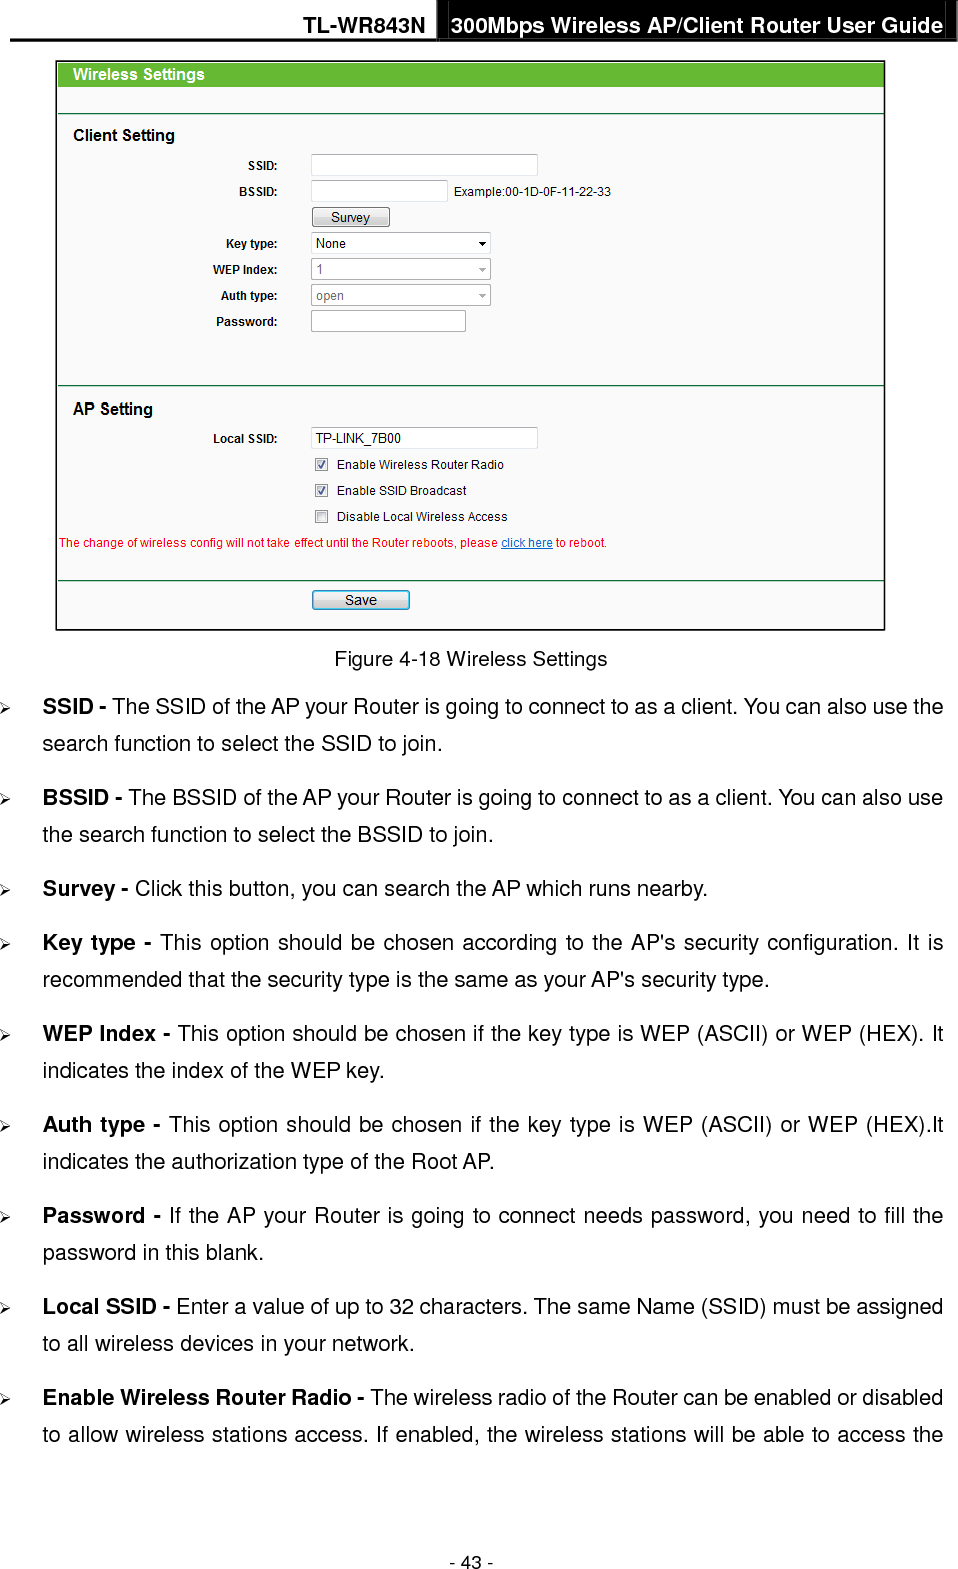 TL-WR843N 300Mbps Wireless AP/Client Router User Guide - 43 - Figure 4-18 Wireless Settings SSID - The SSID of the AP your Router is going to connect to as a client. You can also use thesearch function to select the SSID to join.BSSID - The BSSID of the AP your Router is going to connect to as a client. You can also usethe search function to select the BSSID to join.Survey - Click this button, you can search the AP which runs nearby.Key type - This option should be chosen according to the AP&apos;s security configuration. It isrecommended that the security type is the same as your AP&apos;s security type.WEP Index - This option should be chosen if the key type is WEP (ASCII) or WEP (HEX). Itindicates the index of the WEP key.Auth type - This option should be chosen if the key type is WEP (ASCII) or WEP (HEX).Itindicates the authorization type of the Root AP.Password - If the AP your Router is going to connect needs password, you need to fill thepassword in this blank.Local SSID - Enter a value of up to 32 characters. The same Name (SSID) must be assignedto all wireless devices in your network.Enable Wireless Router Radio - The wireless radio of the Router can be enabled or disabledto allow wireless stations access. If enabled, the wireless stations will be able to access the